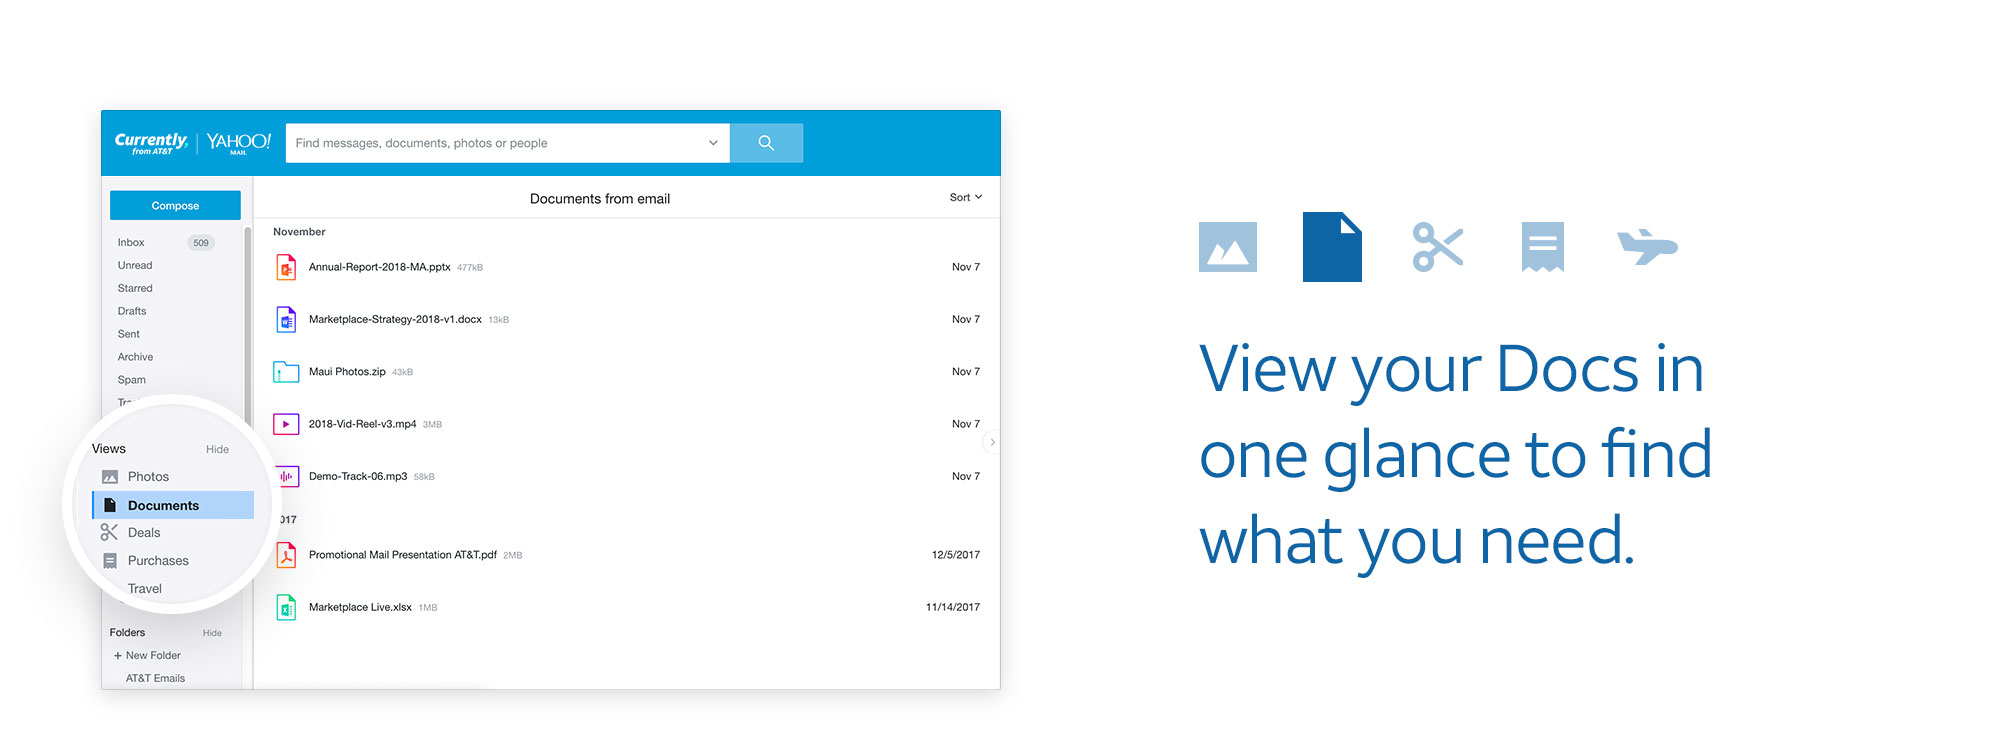 View your docs in one glance to find what you need with Currently, from AT&T email